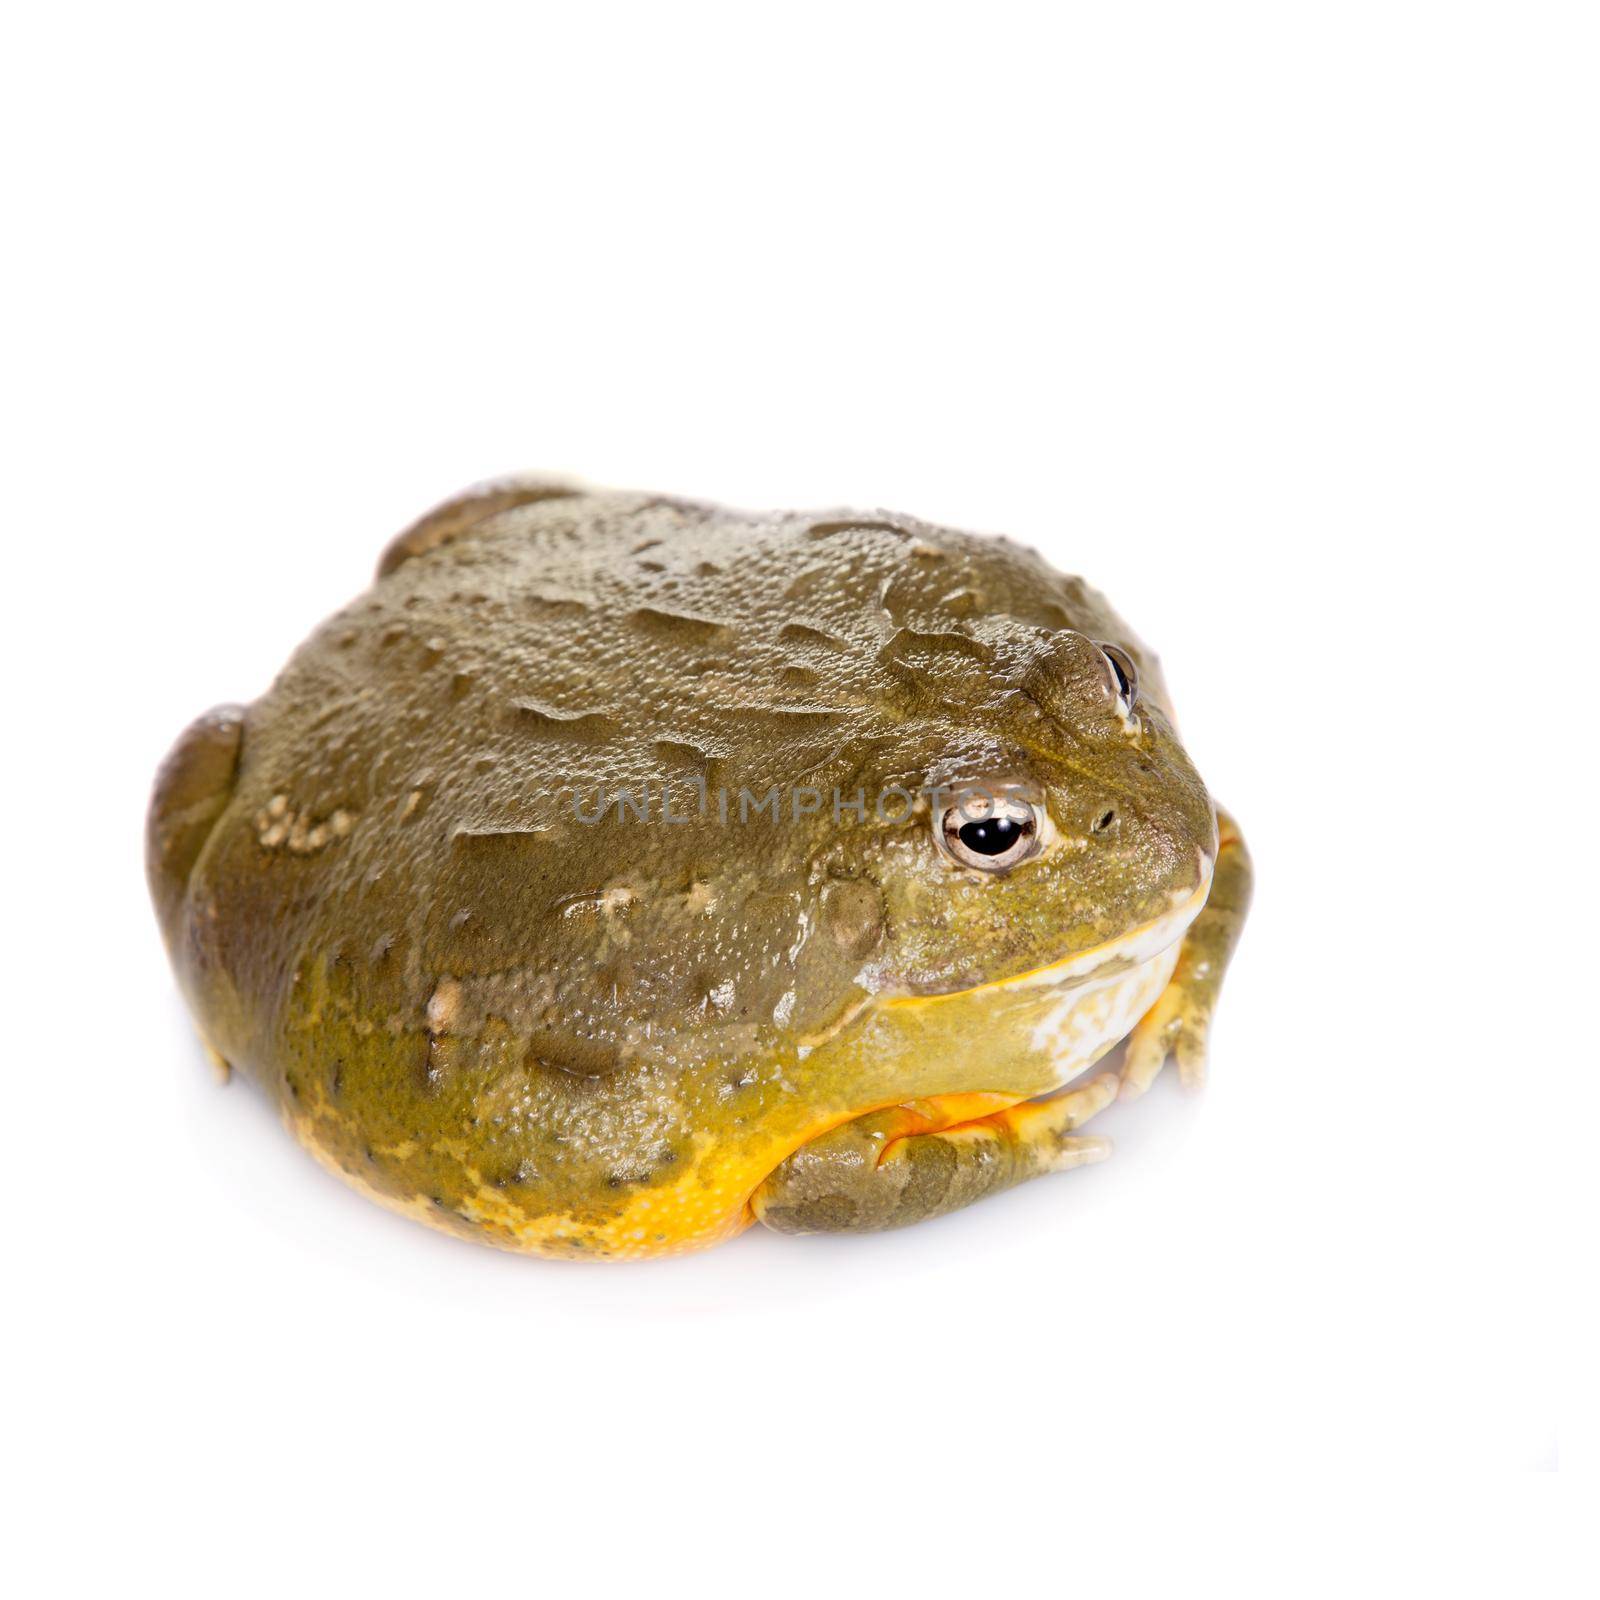 The African bullfrog on white by RosaJay